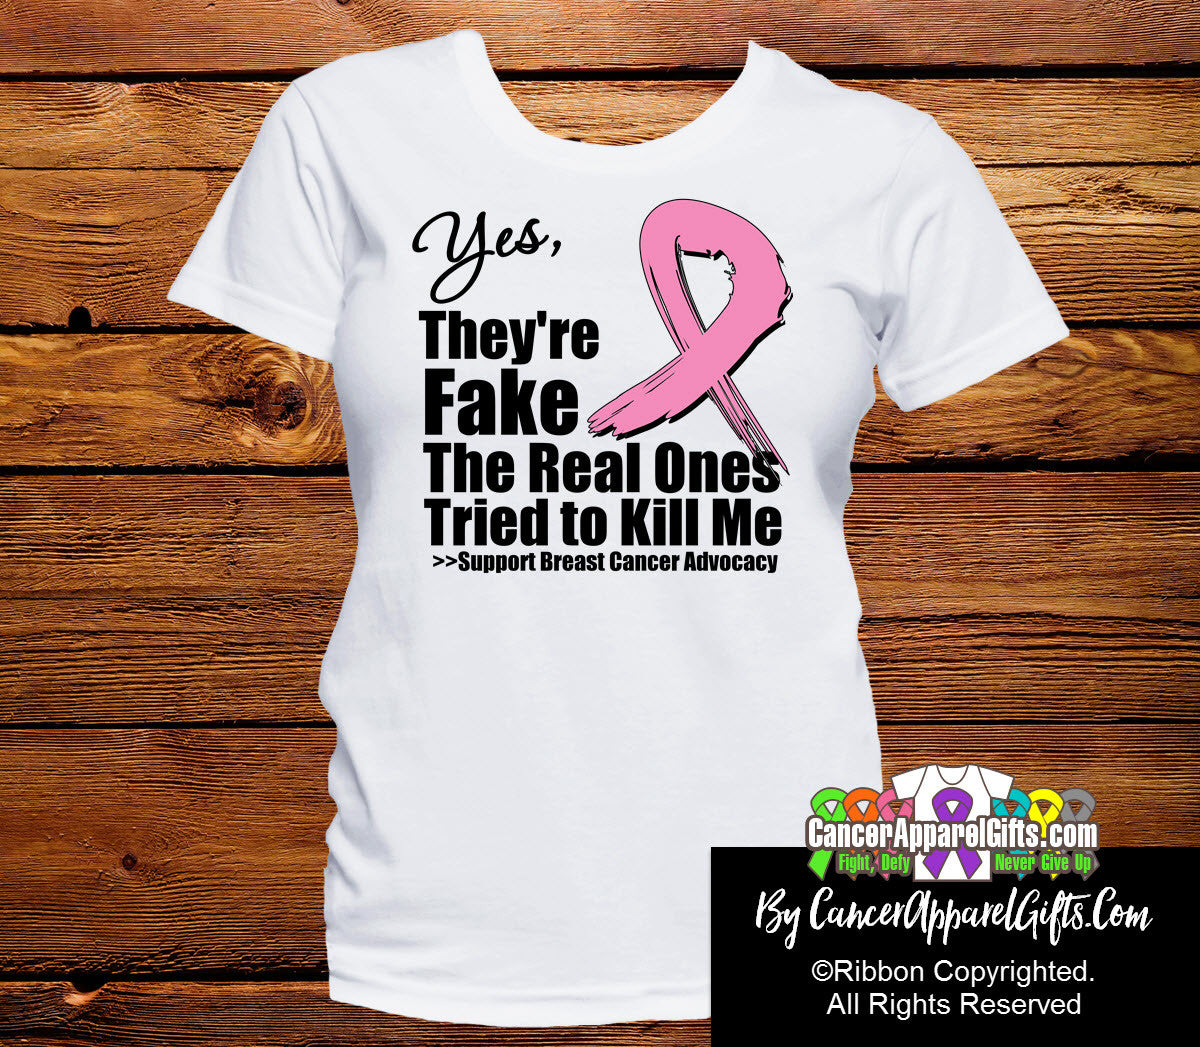 Yes They are Fake Breast Cancer Shirts